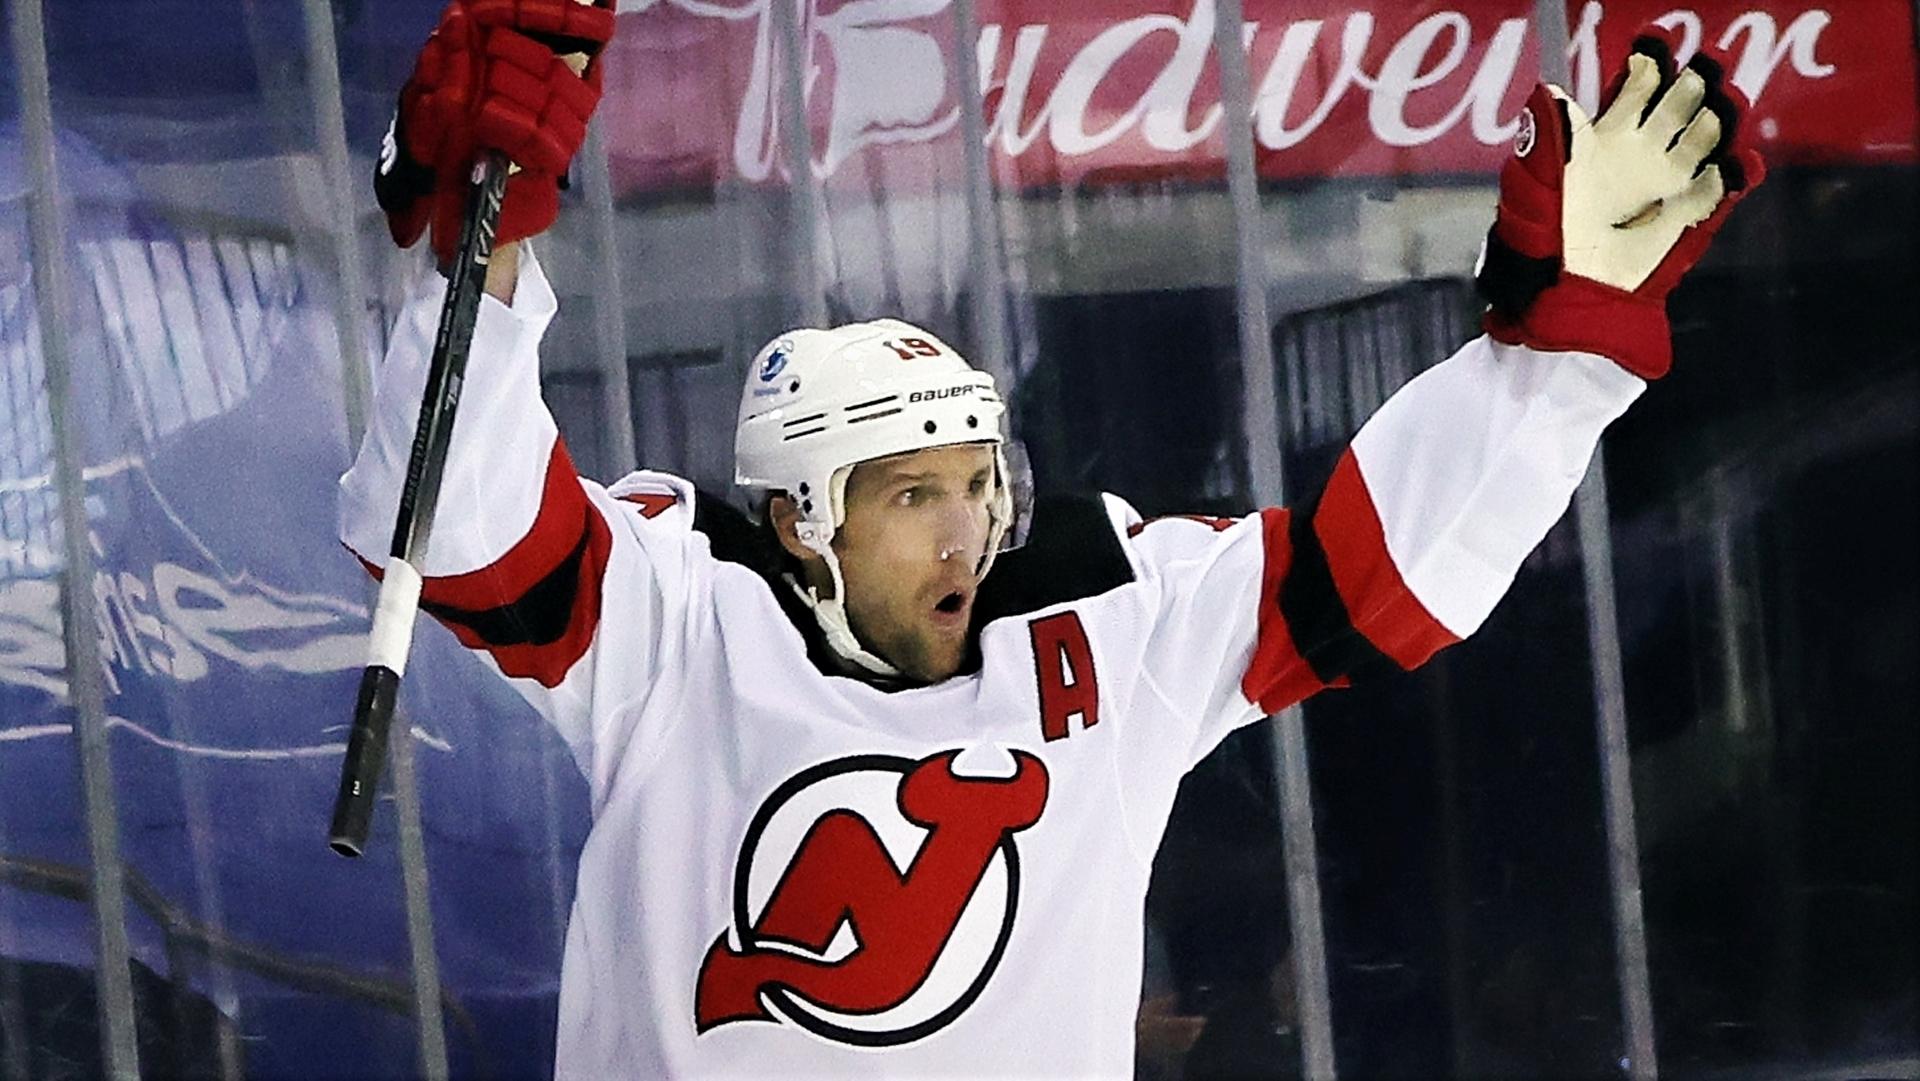 Jan 19, 2021; New York, New York, USA; New Jersey Devils center Travis Zajac (19) celebrates after scoring a goal against the New York Rangers at 32 seconds of the first period at Madison Square Garden. Mandatory Credit: Bruce Bennett/Pool Photos-USA TODAY Sports / © POOL PHOTOS-USA TODAY Sports